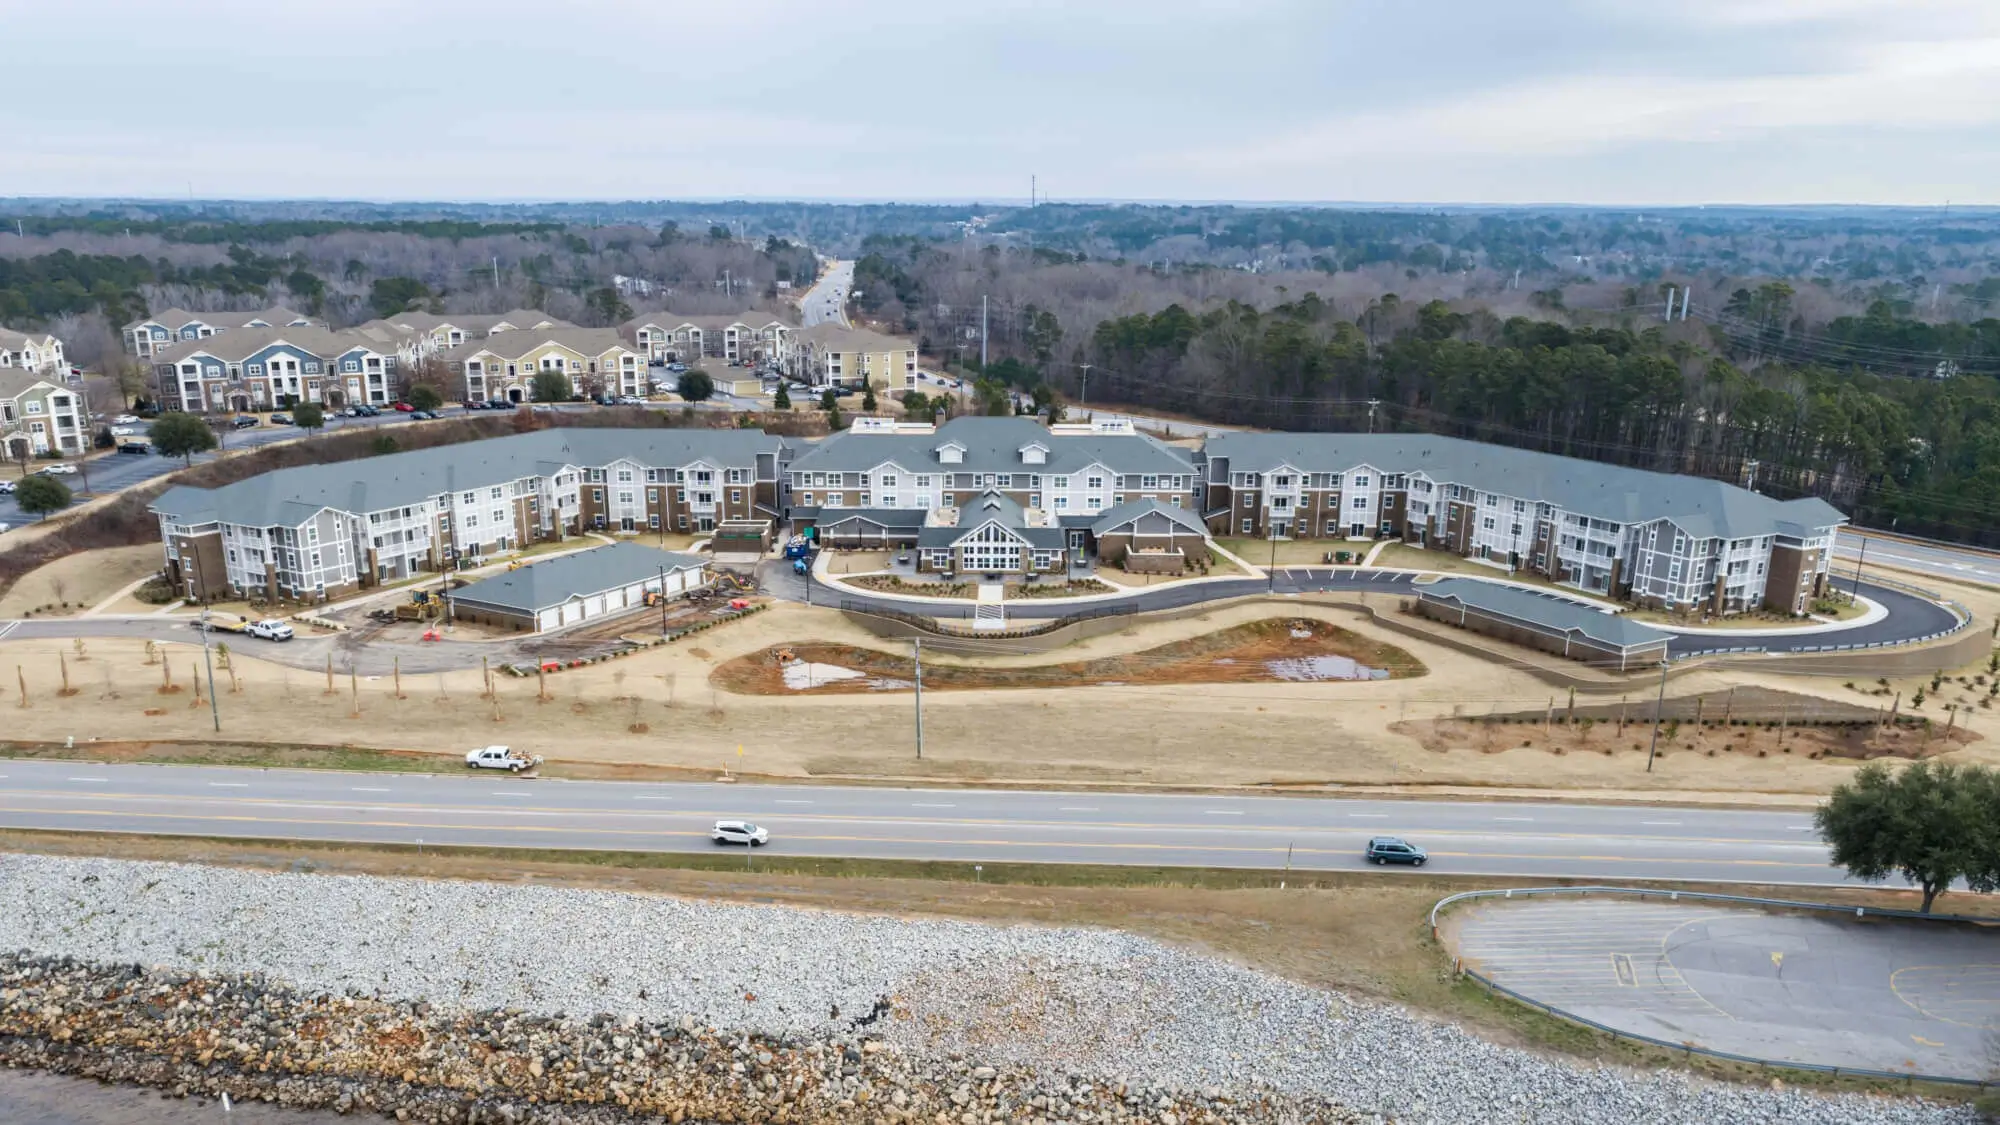 Aerial view of Lakeview Retirement Community in Columbia, South Carolina